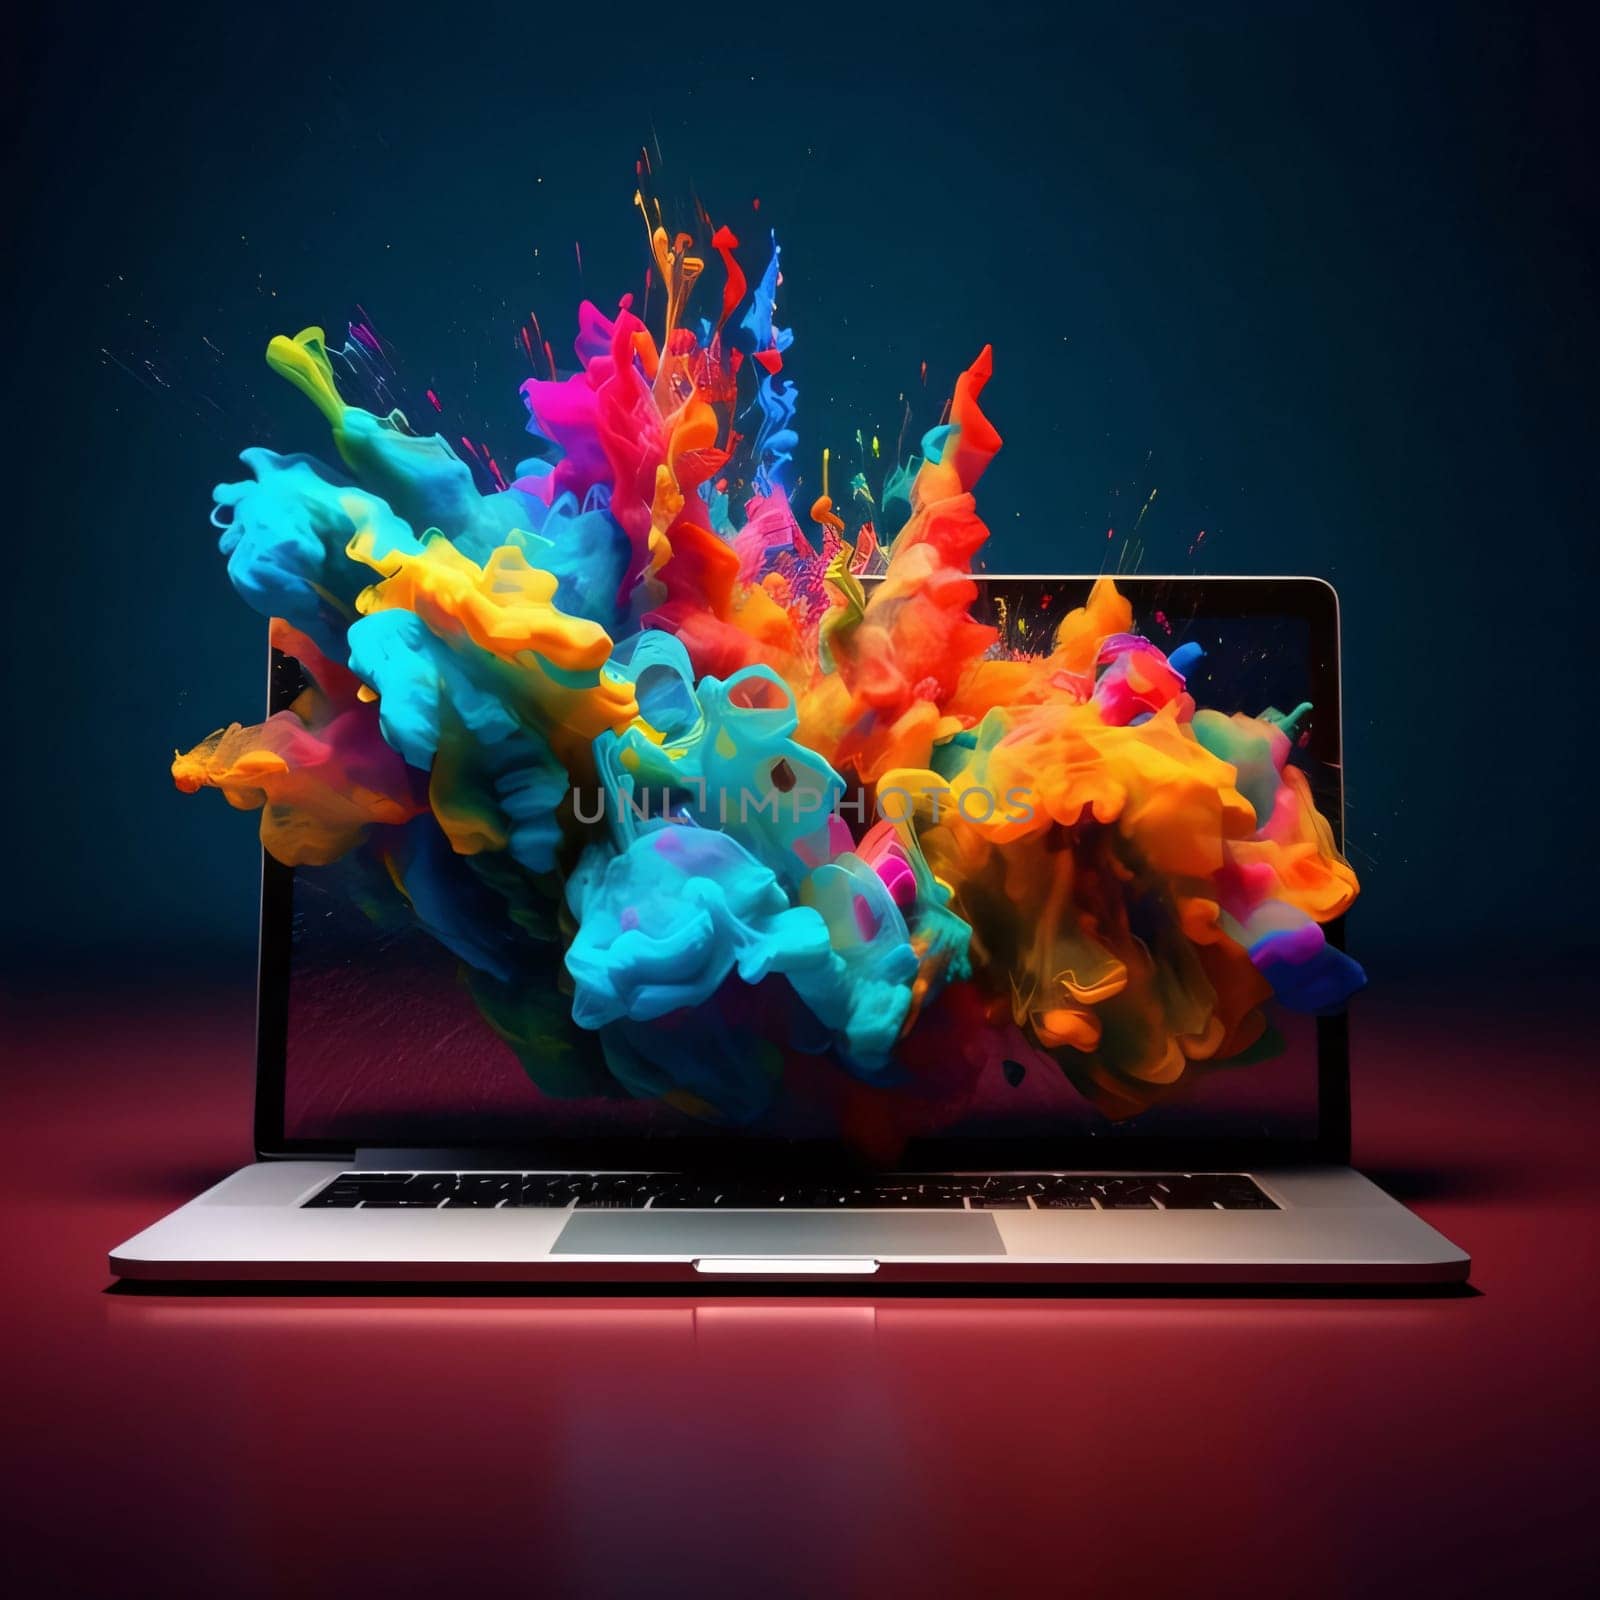 Abstract background design: Modern laptop with colorful paint splashes on dark background. 3D rendering